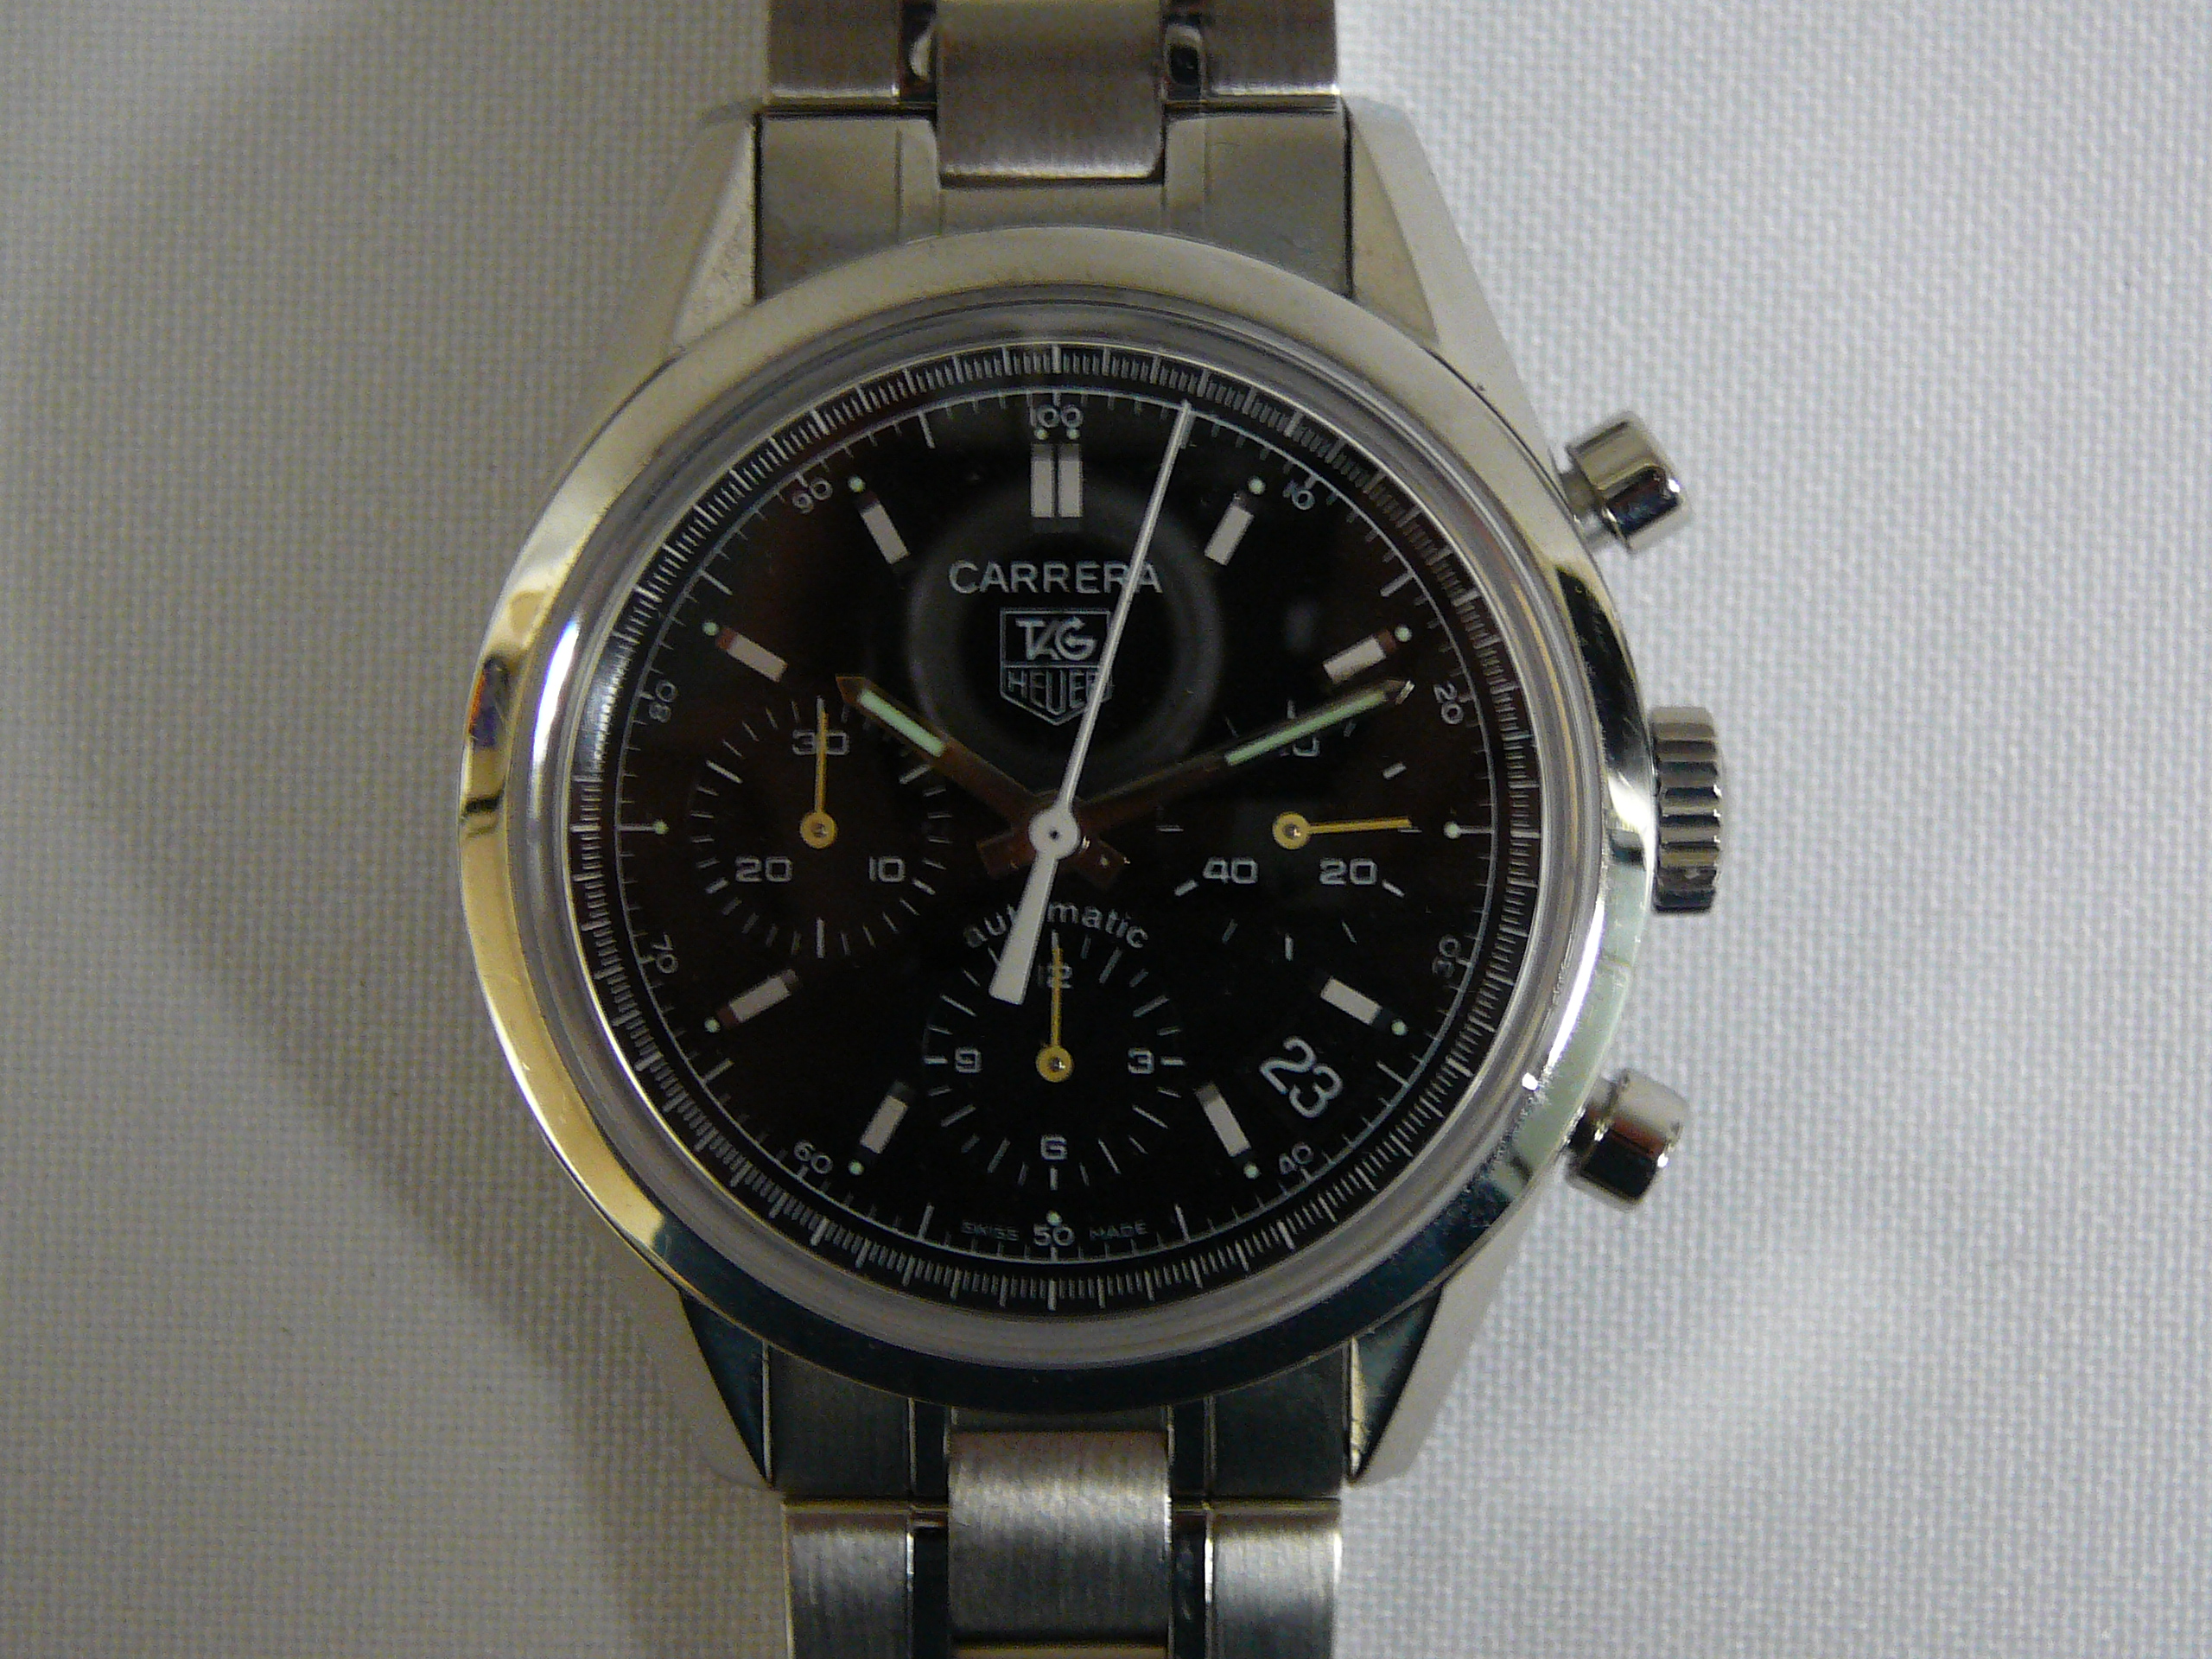 Gents Tag Heuer Wrist Watch - Image 4 of 5